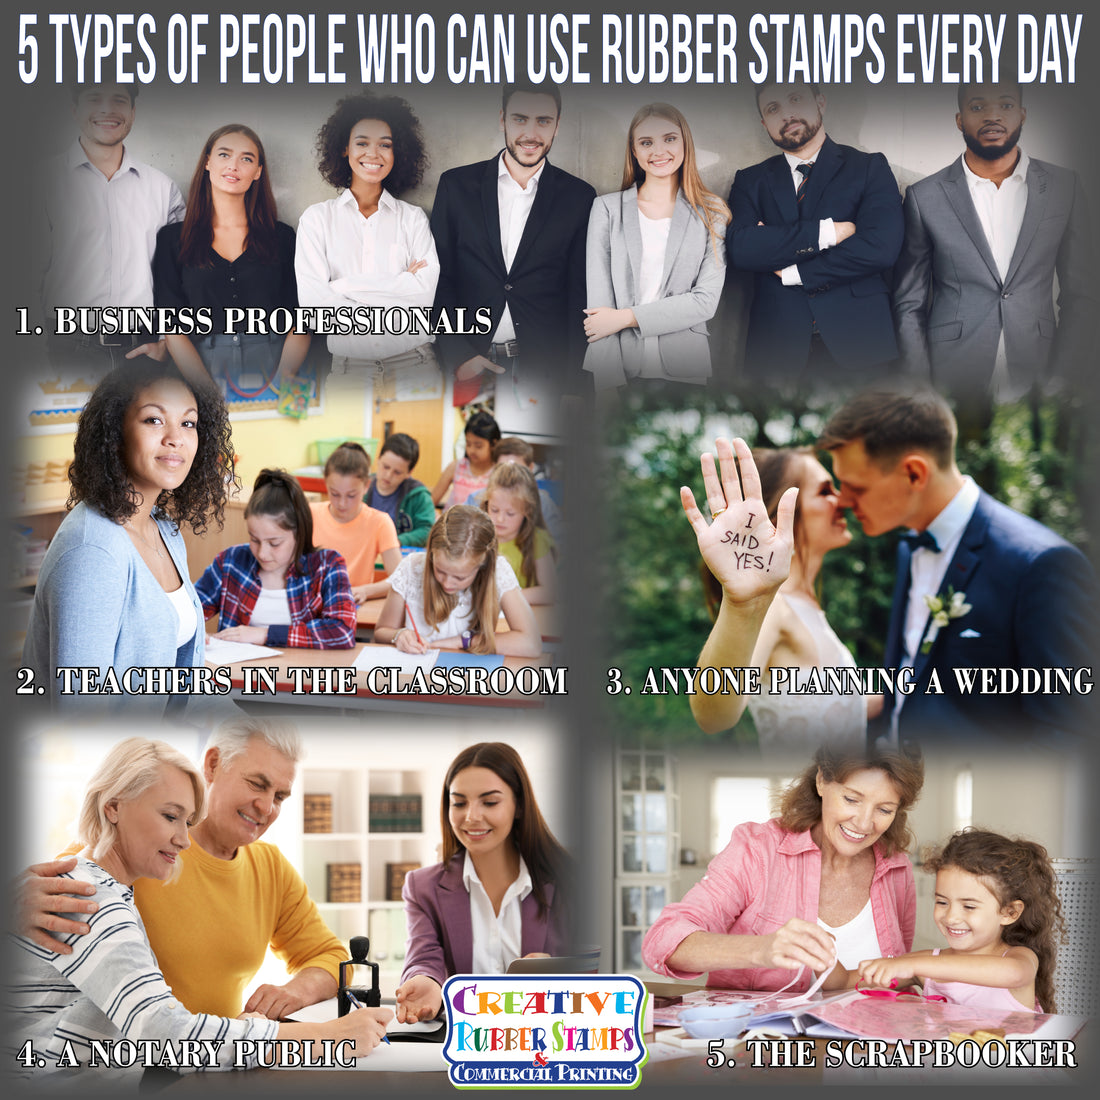 5 Types of People Who Can Use Rubber Stamps Every Day